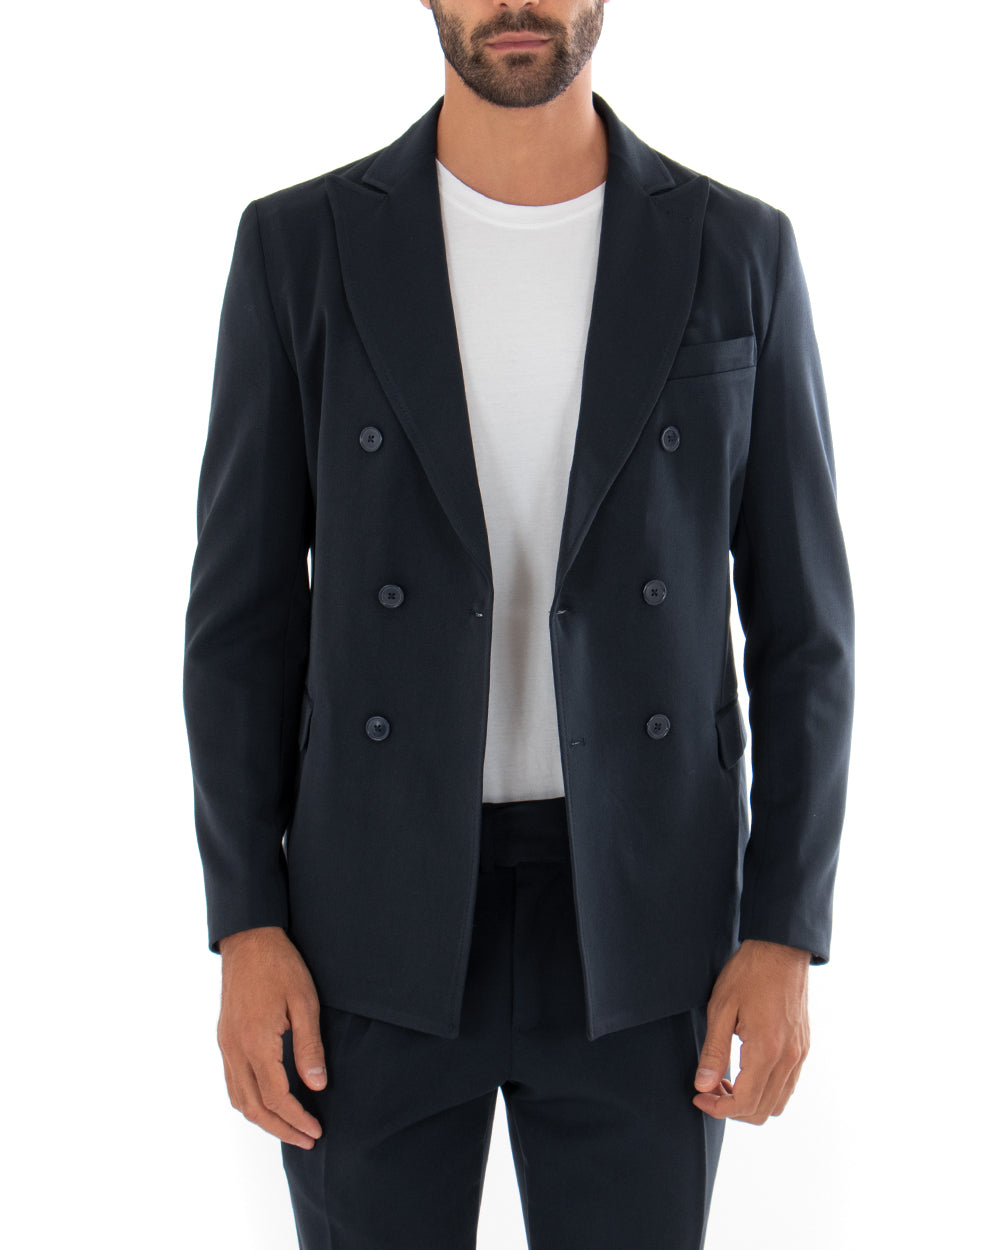 Double-Breasted Men's Suit Blue Viscose Tailored Jacket Trousers Elegant Casual GIOSAL-OU2084A